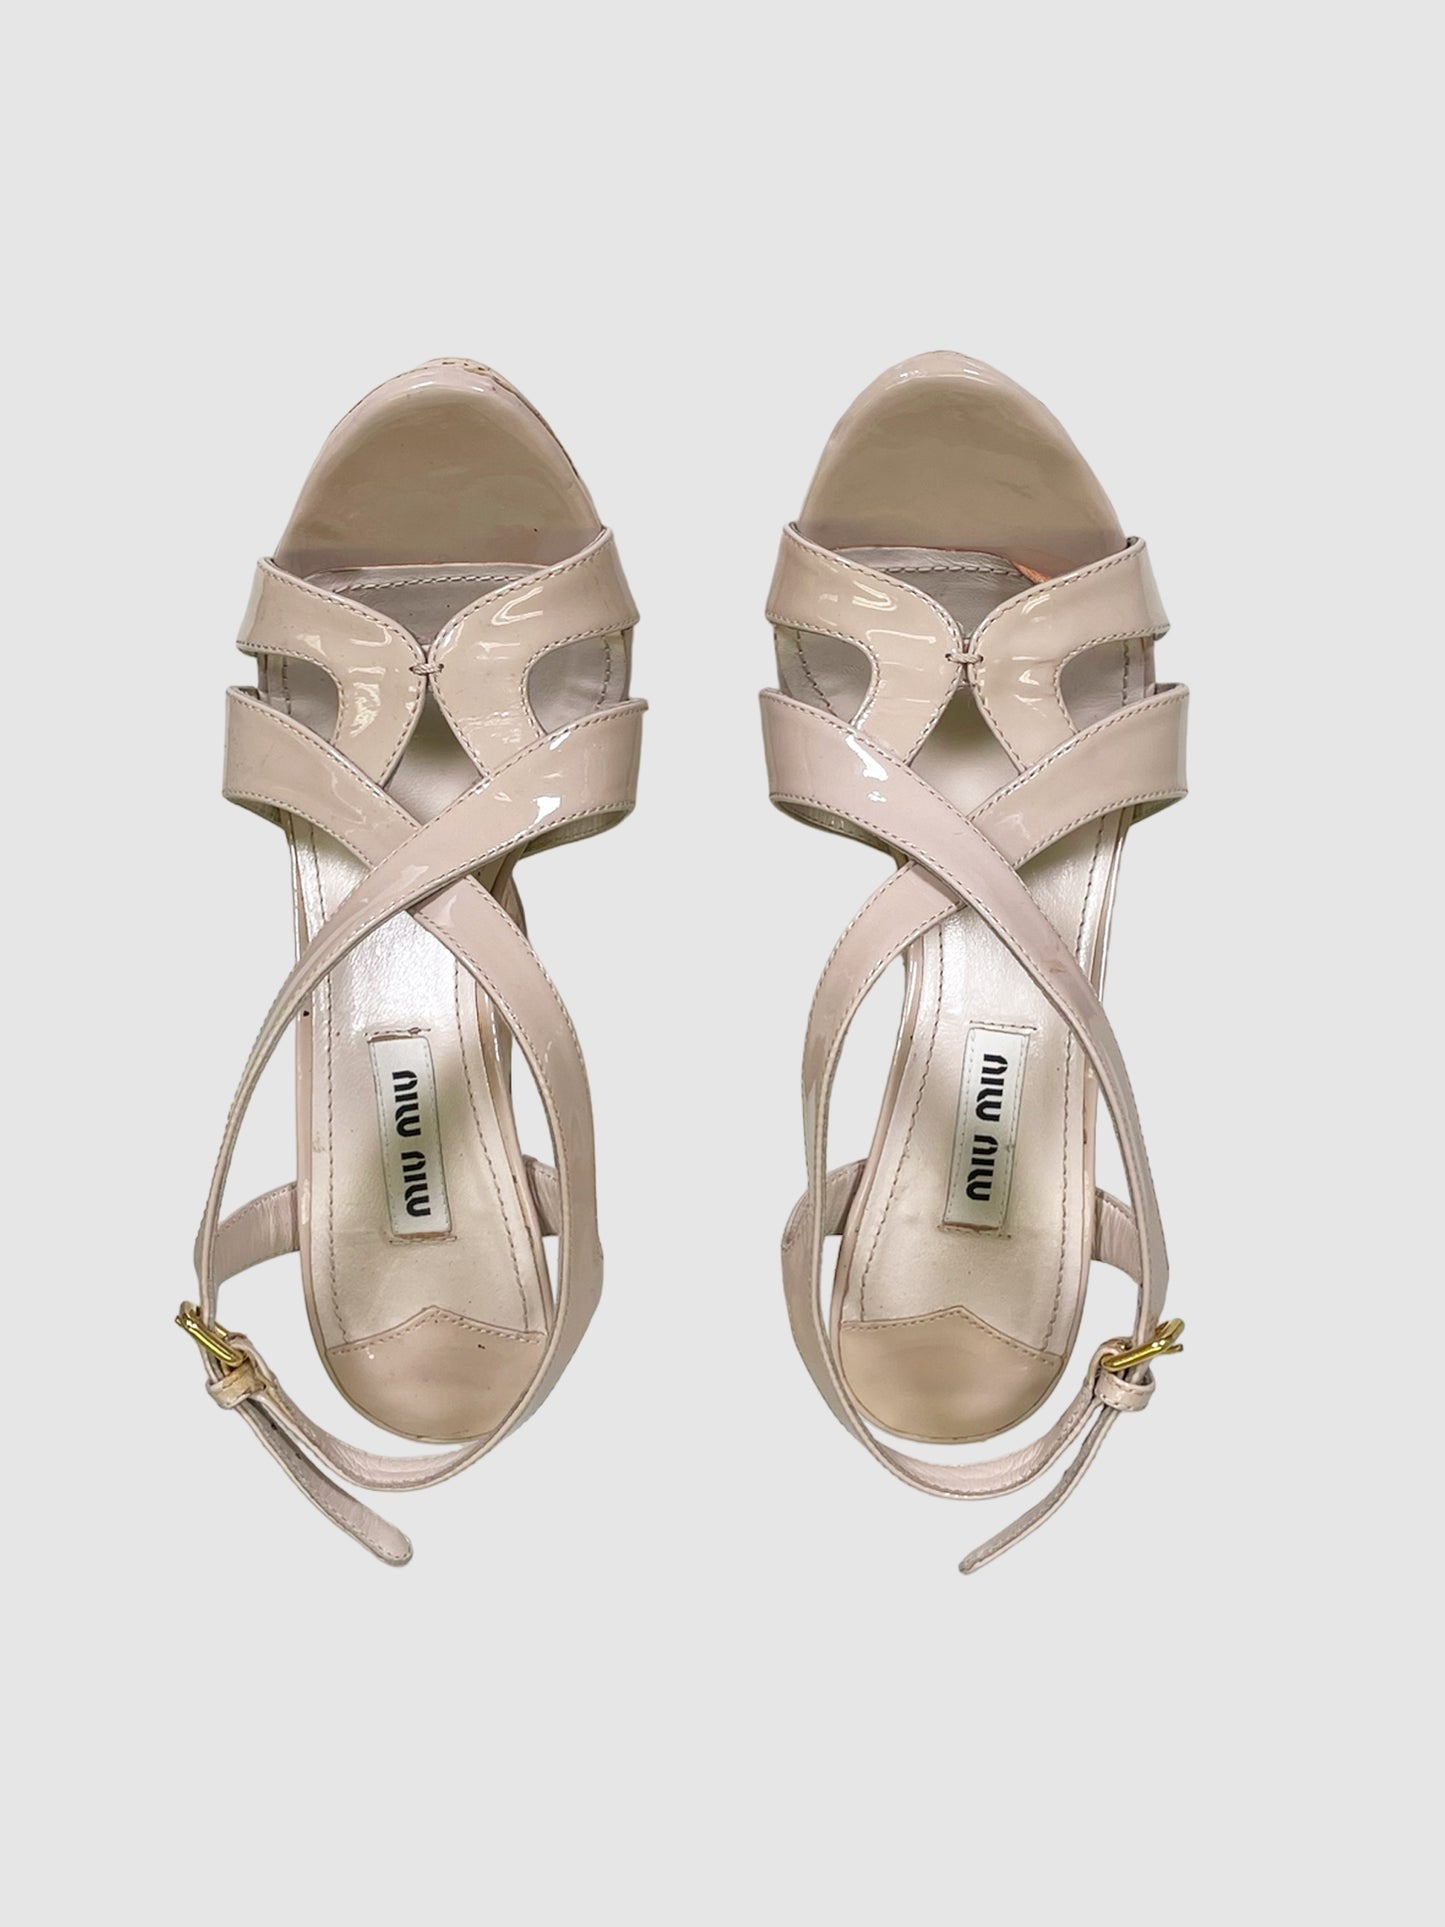 Patent Leather Wedges - Size 36